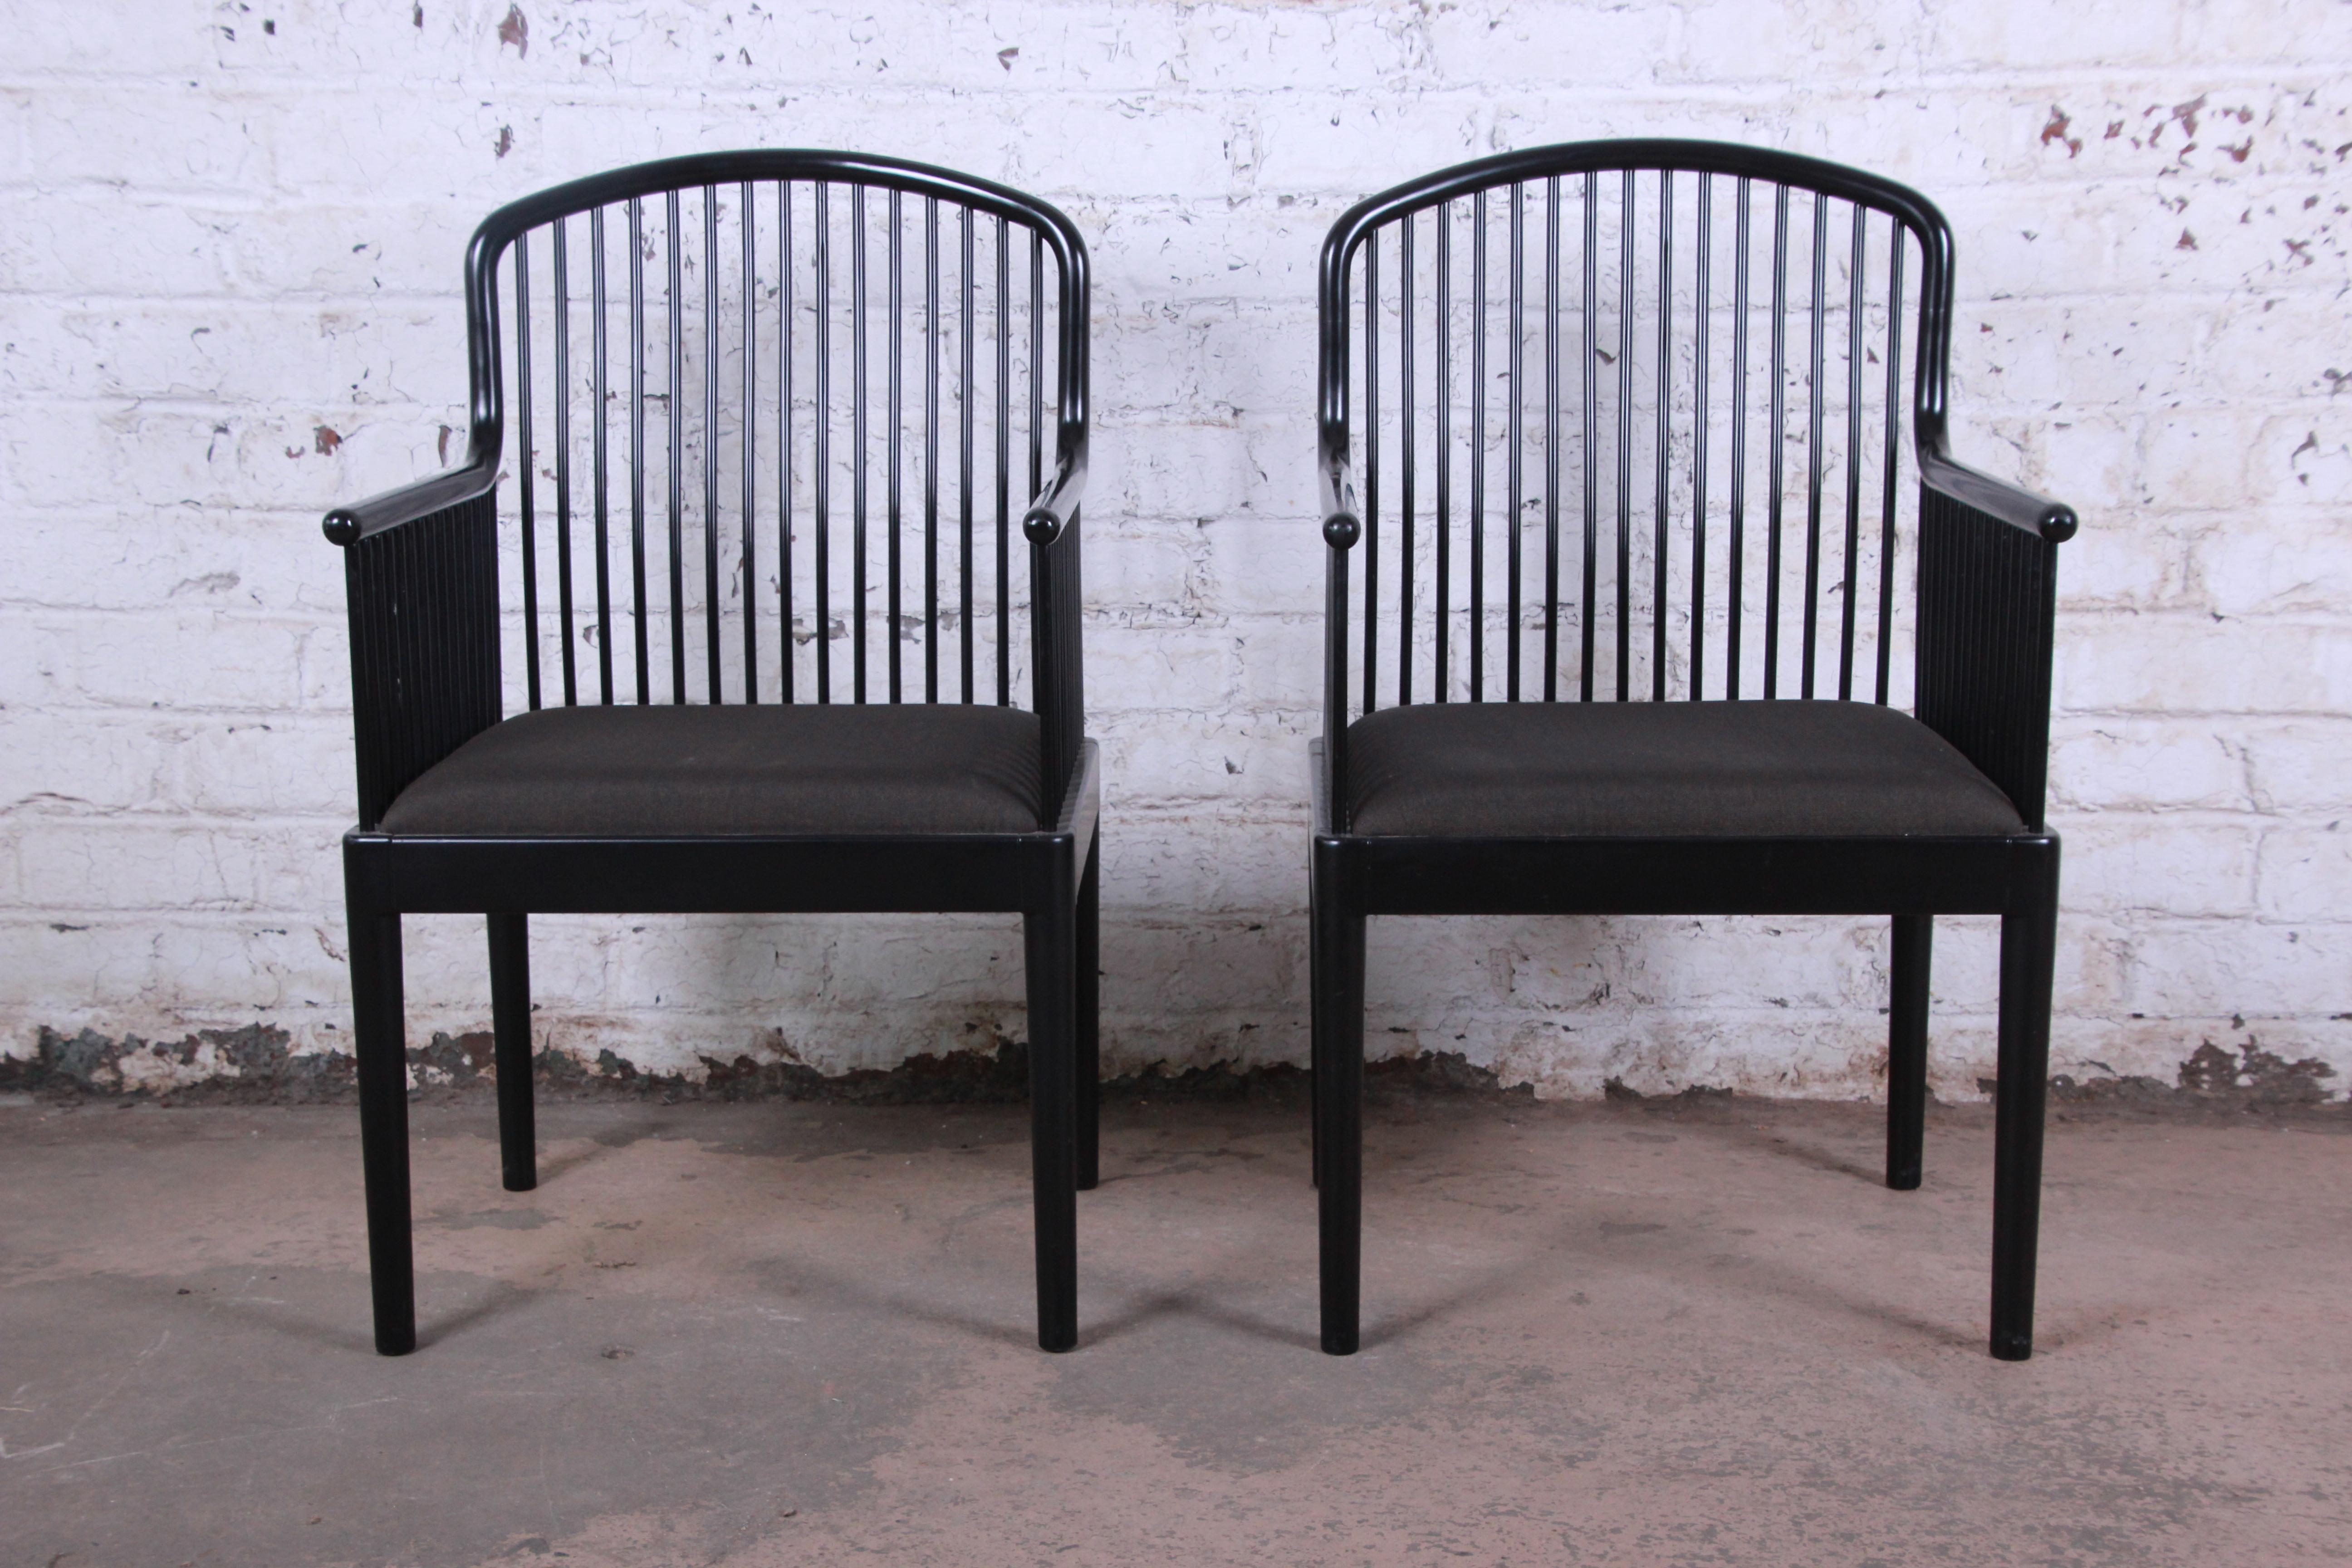 An exceptional pair of Andover black lacquered spindle armchairs designed by Davis Allen and made in Italy by Stendig, circa 1980. The chairs feature solid beech frames with a striking black lacquer finish and original charcoal gray upholstery. A